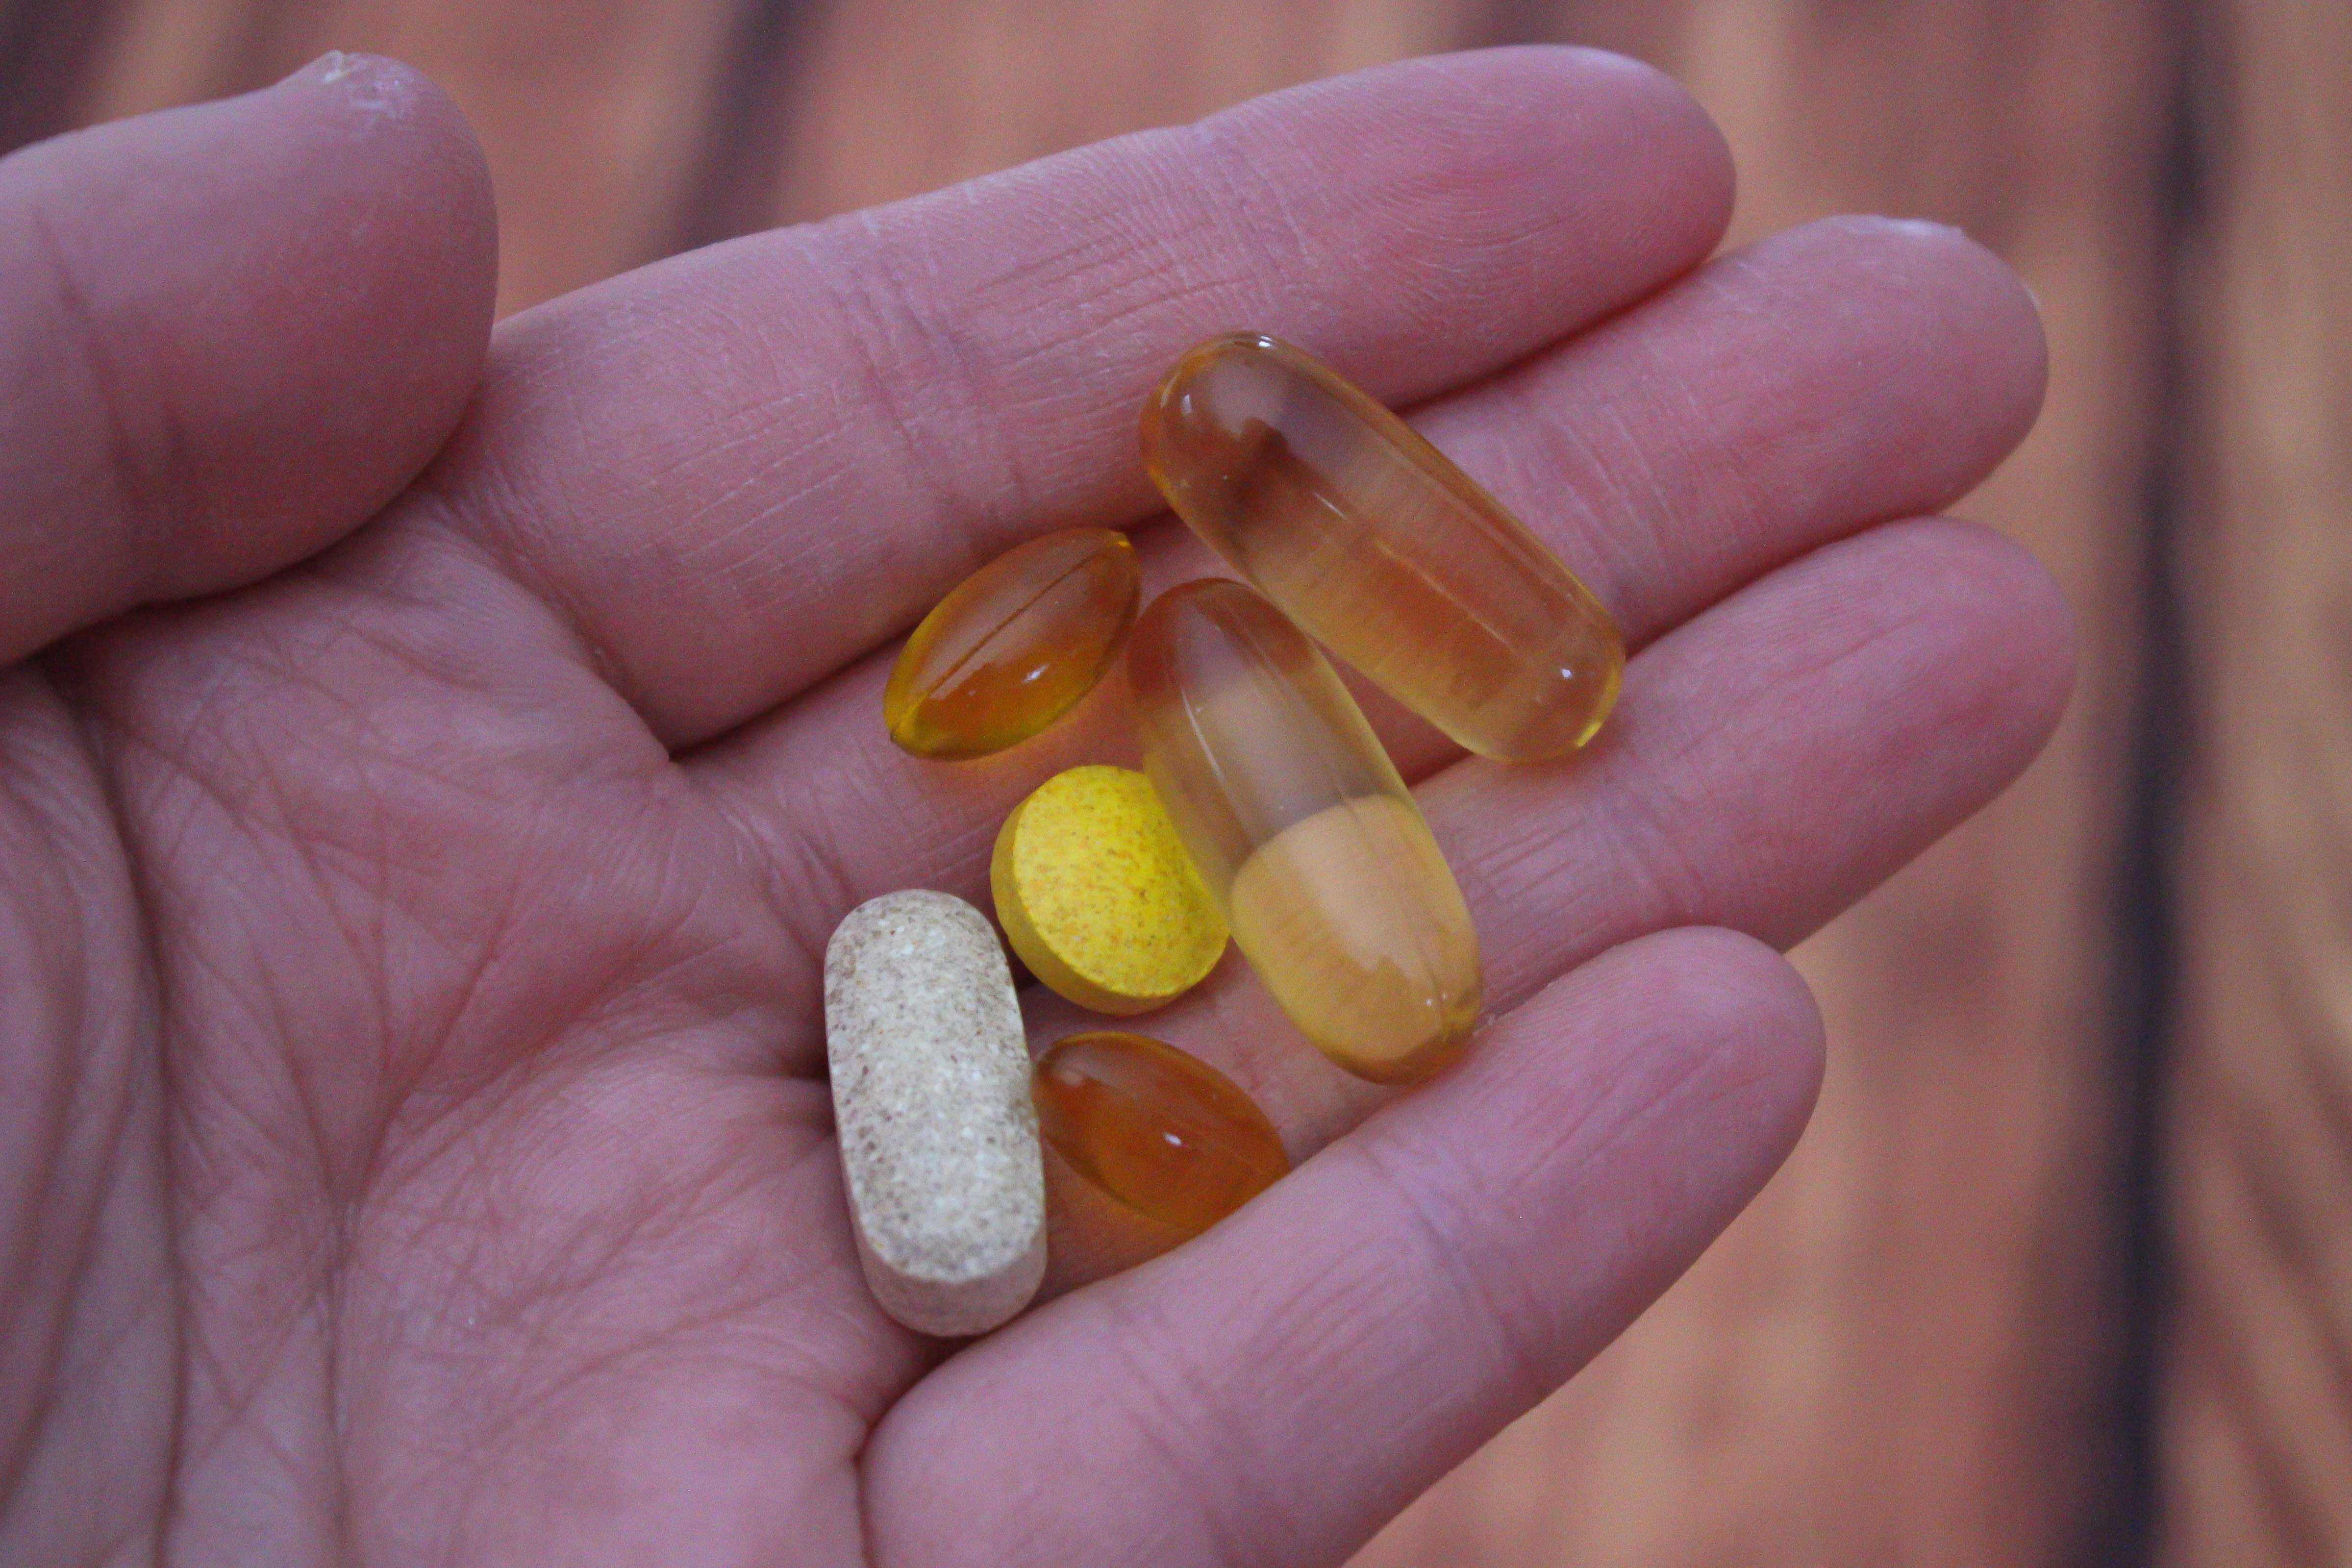 Open hand holding various vitamins and supplements